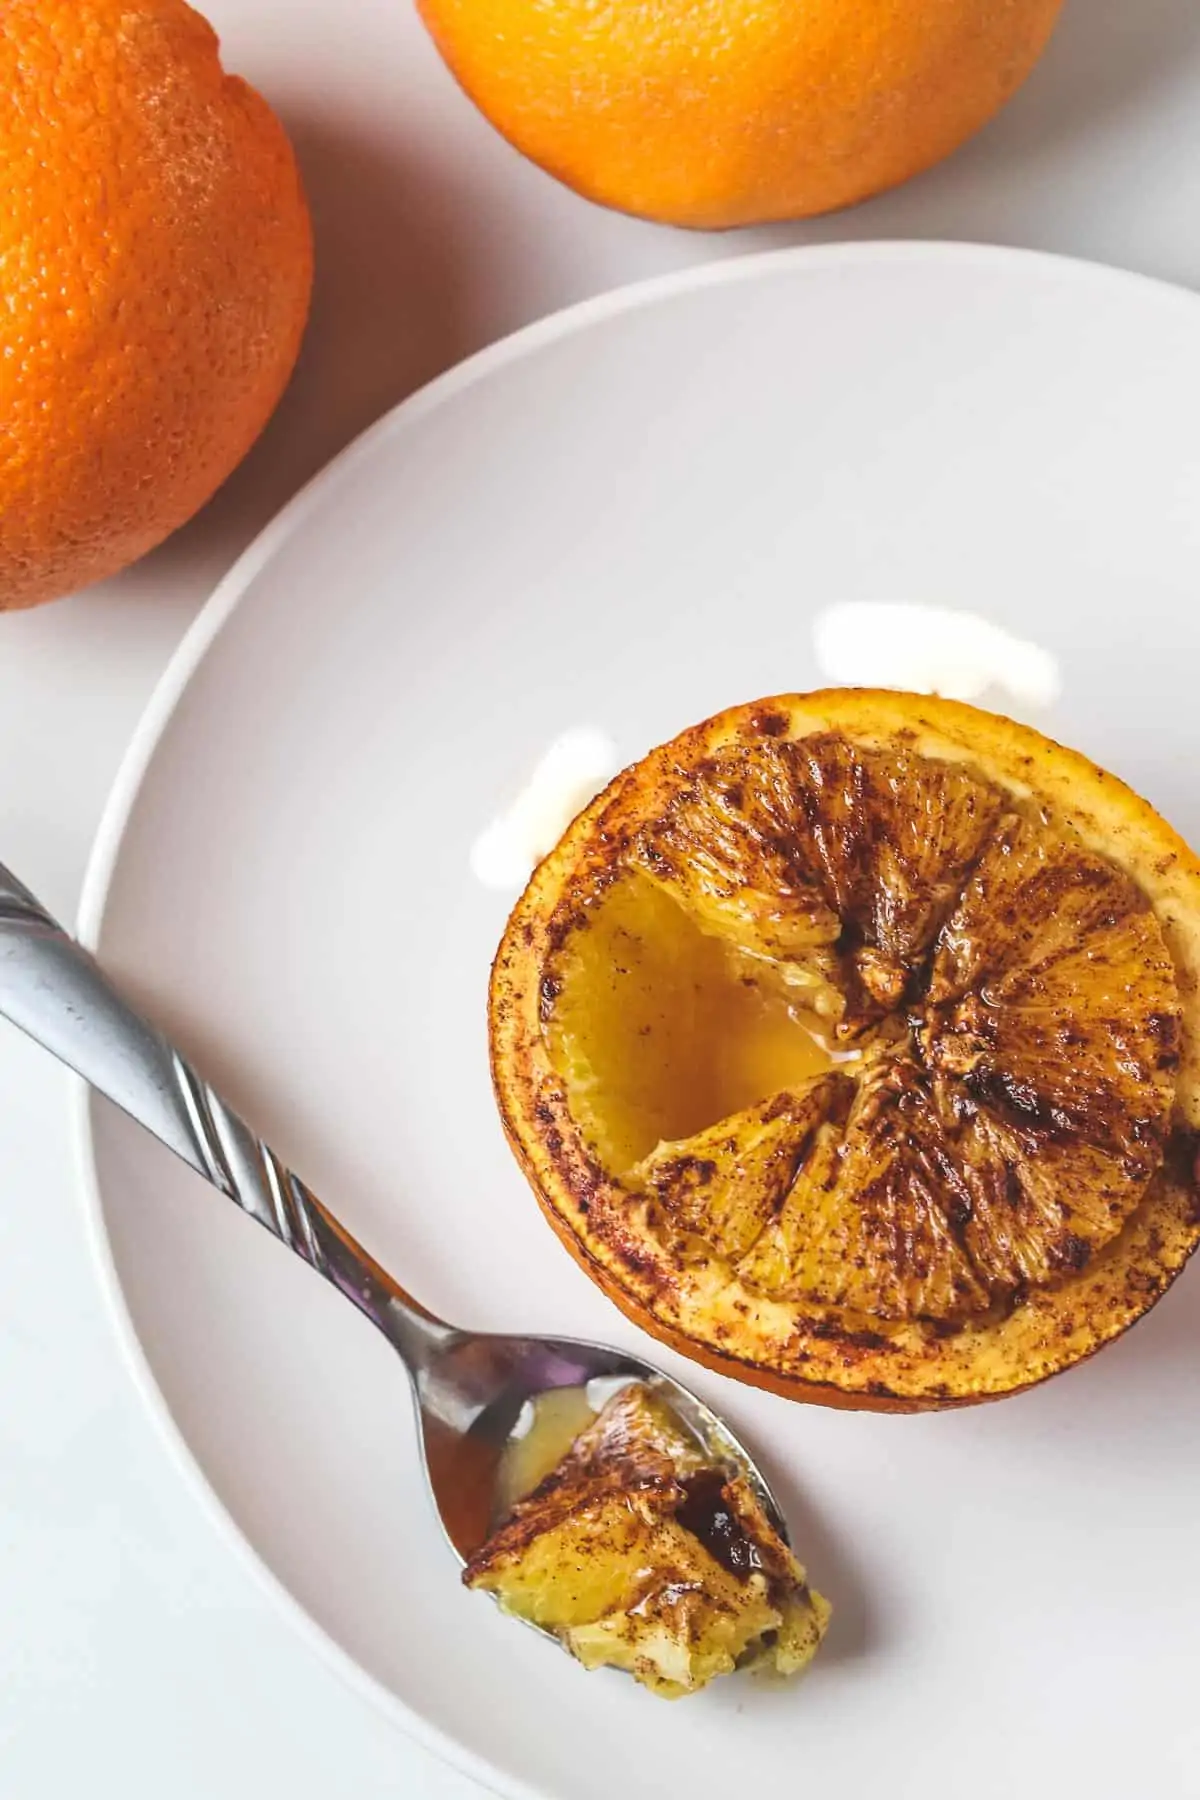 baked orange on a white plate with a bite in a spoon